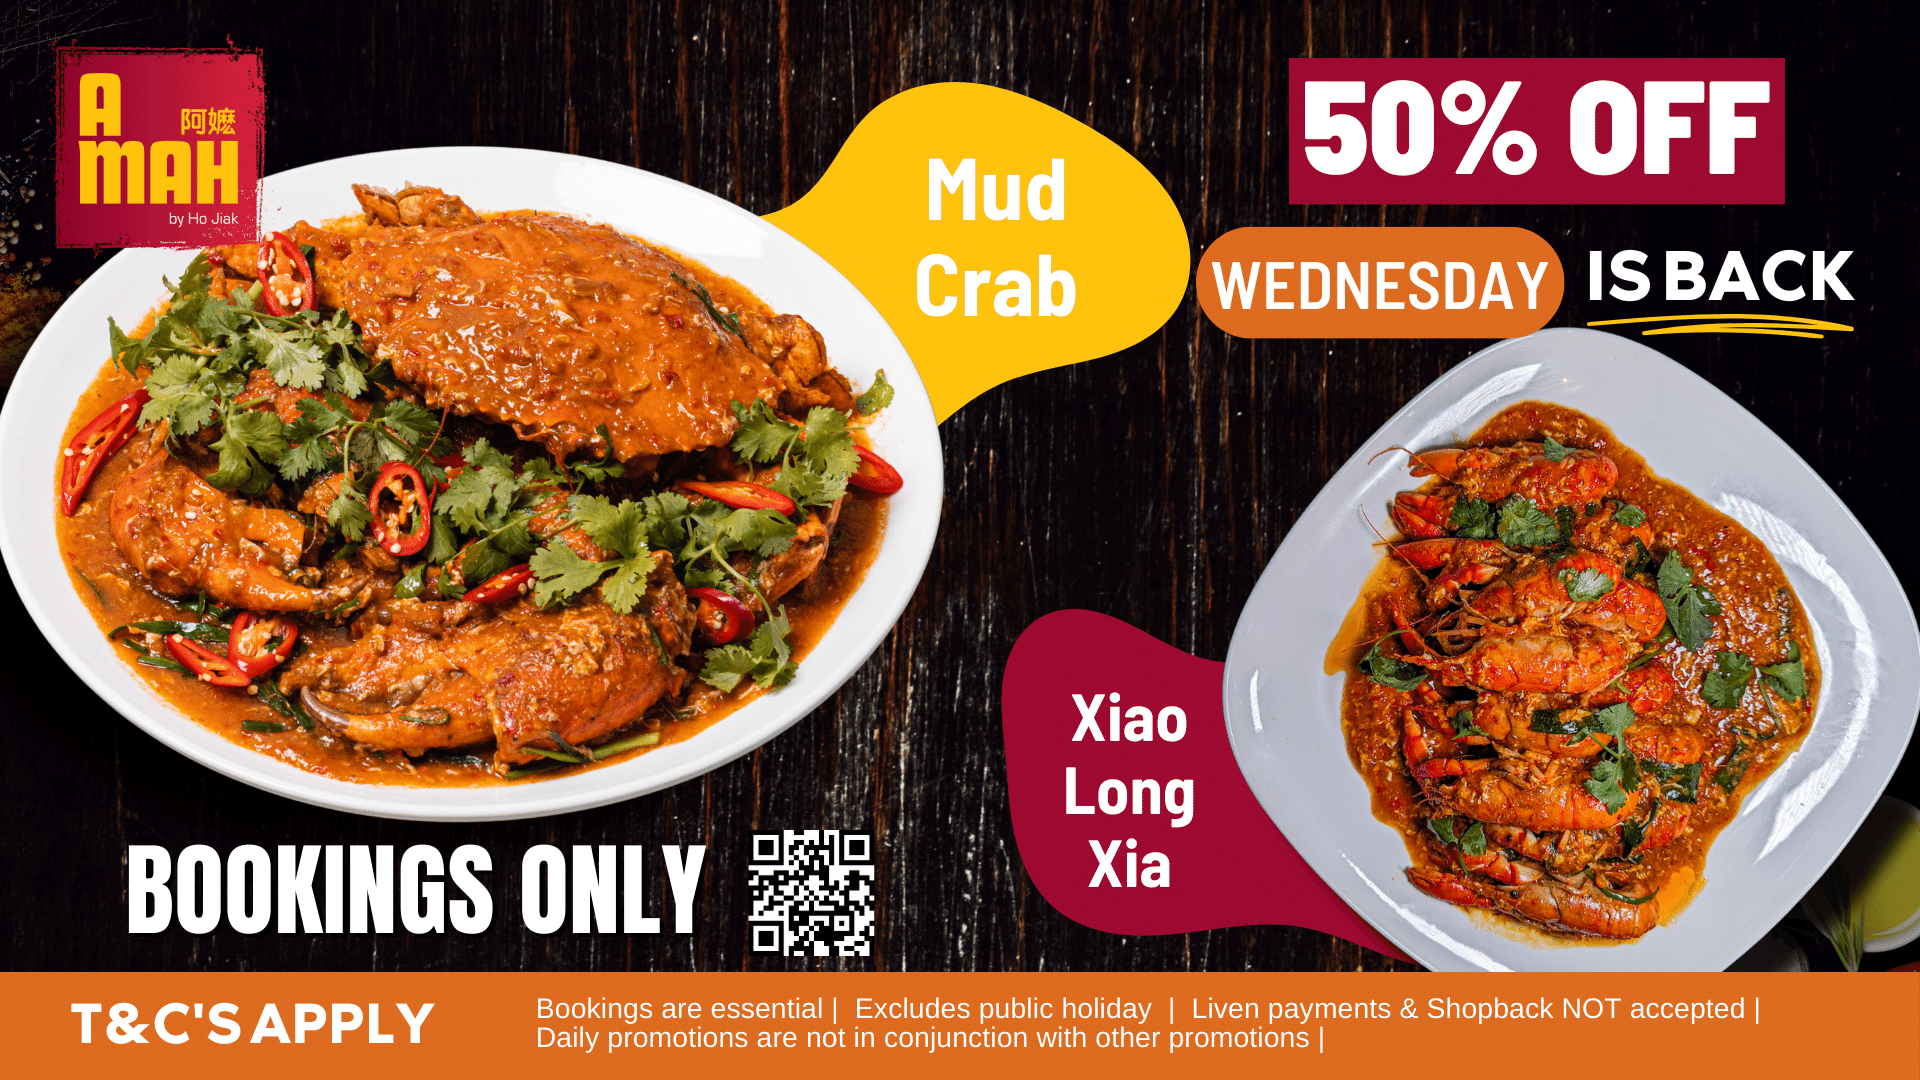 50% OFF Mud Crab & Xiao Long Xia. Only available on Wednesdays via bookings, while stocks last! Book Now